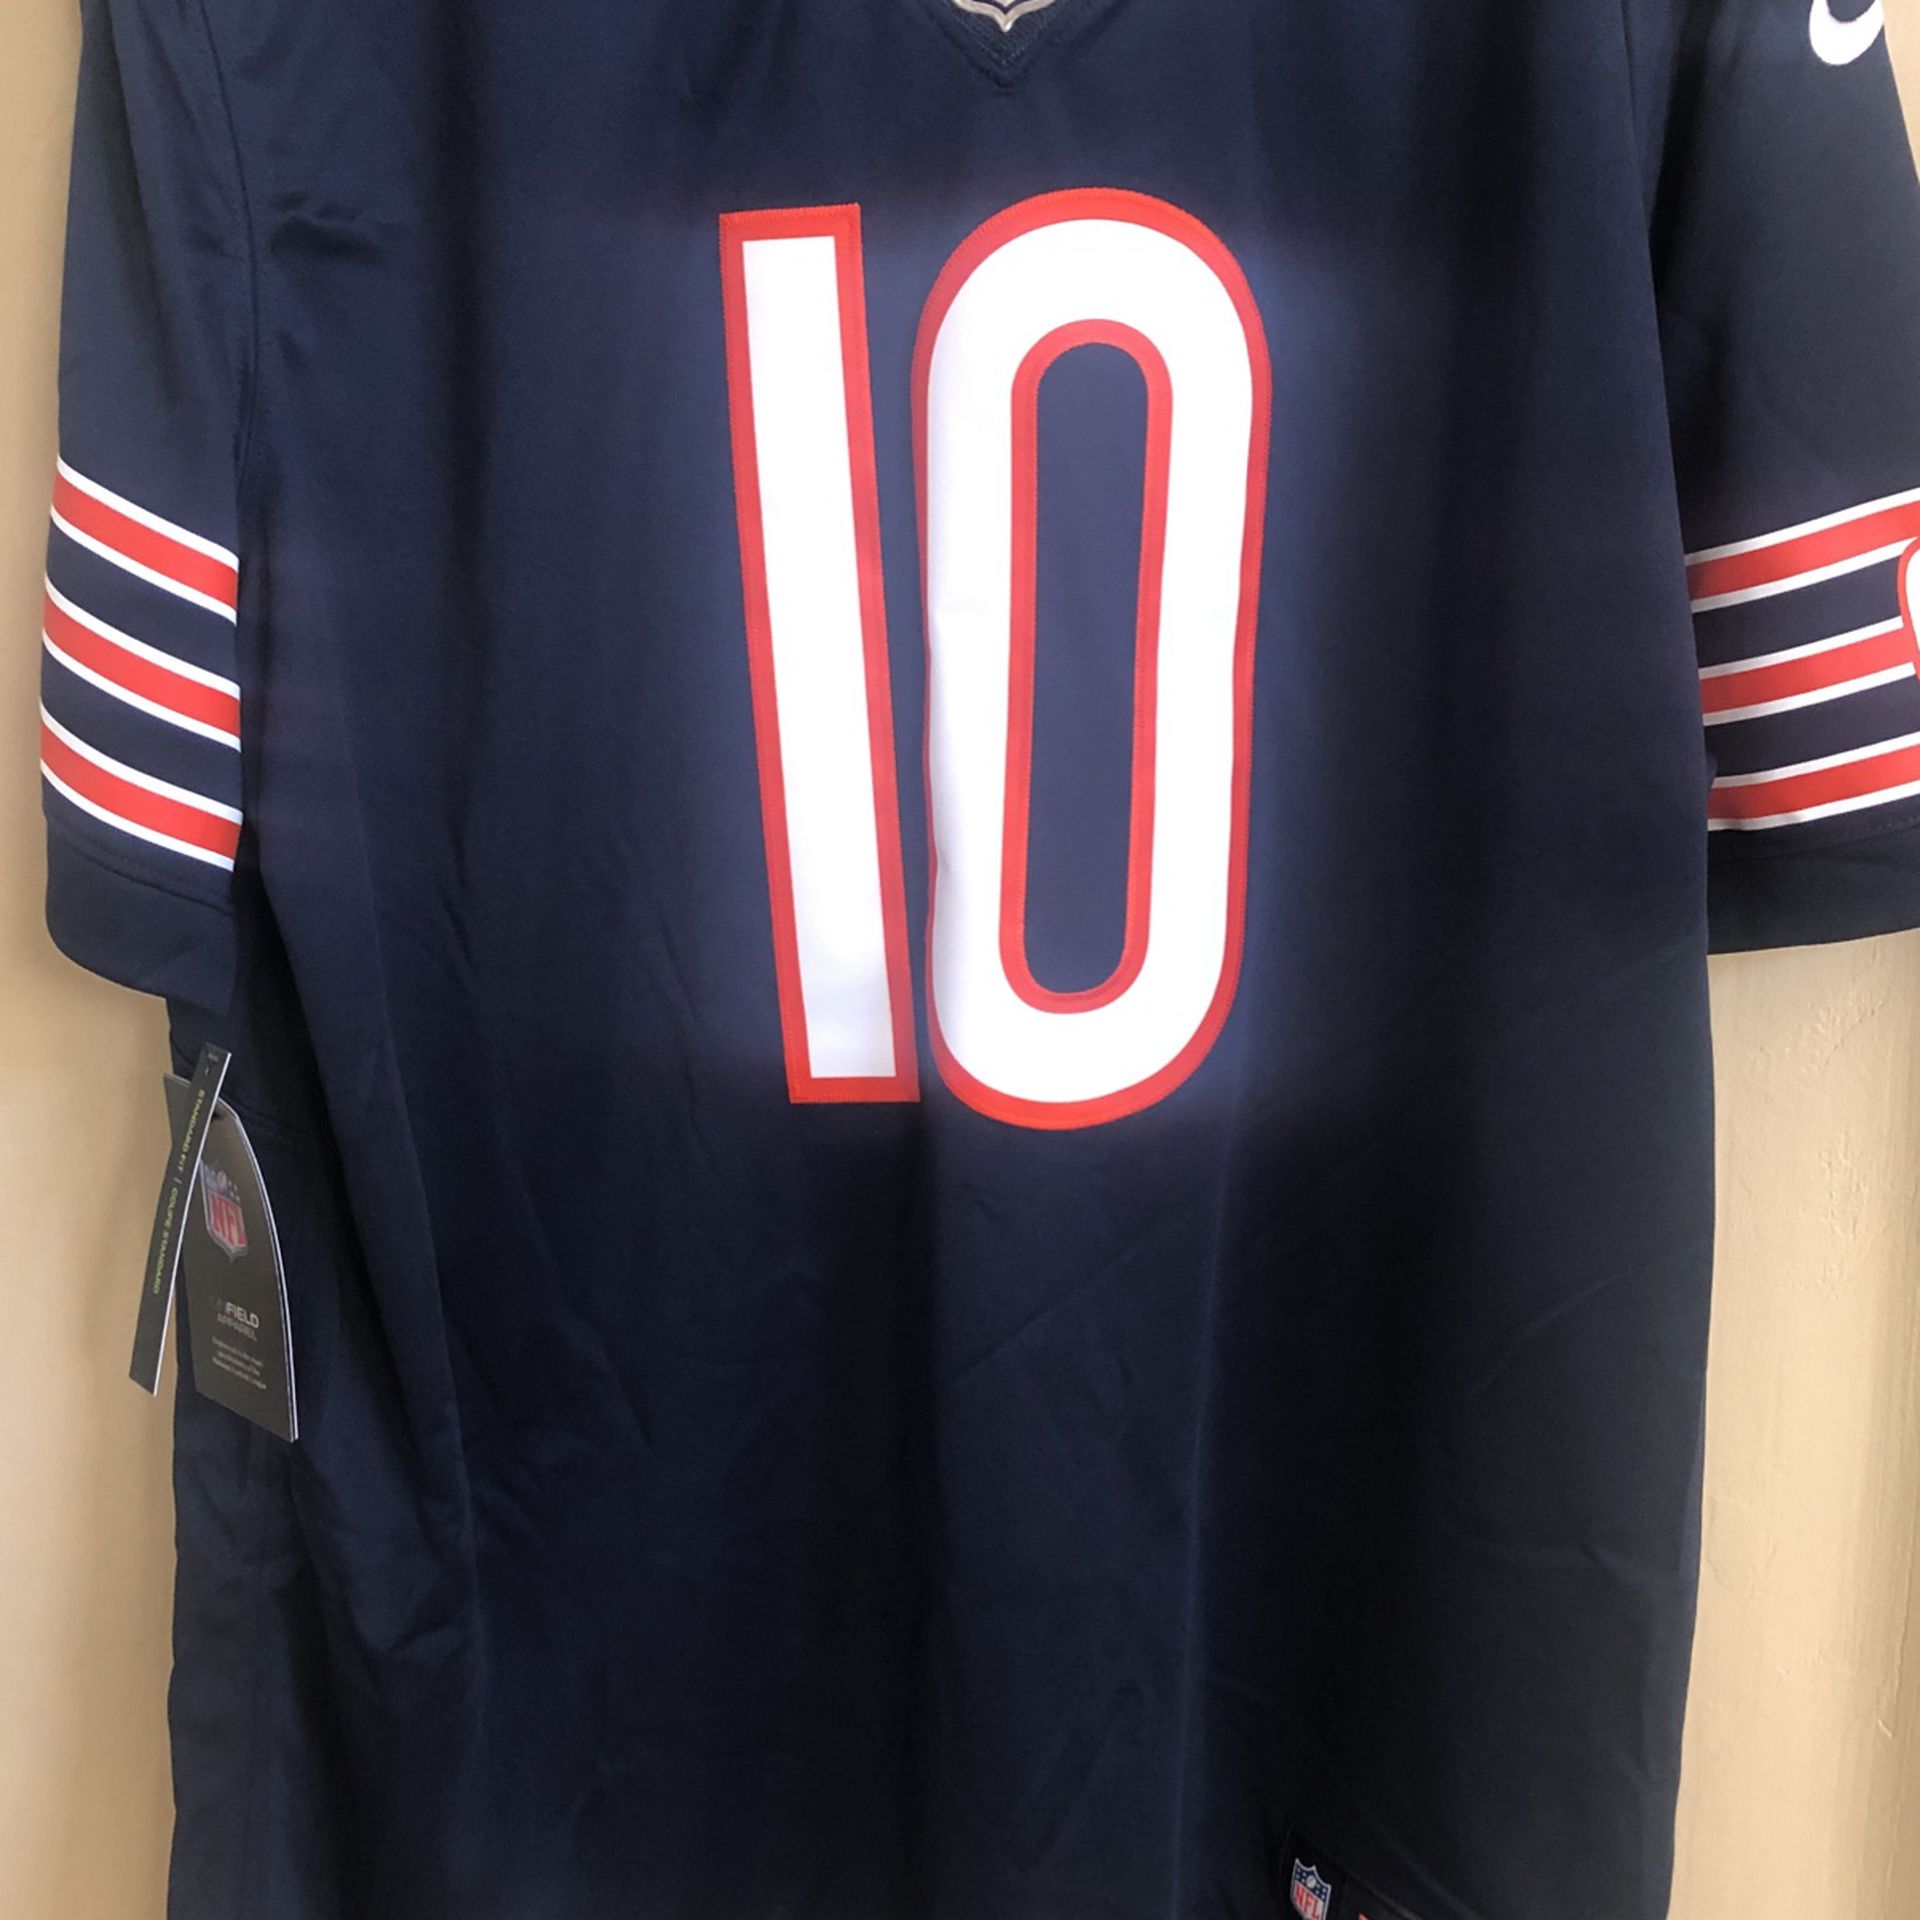 $150 Chicago Bears Trubisky NFL Jersey Authentic Size XL